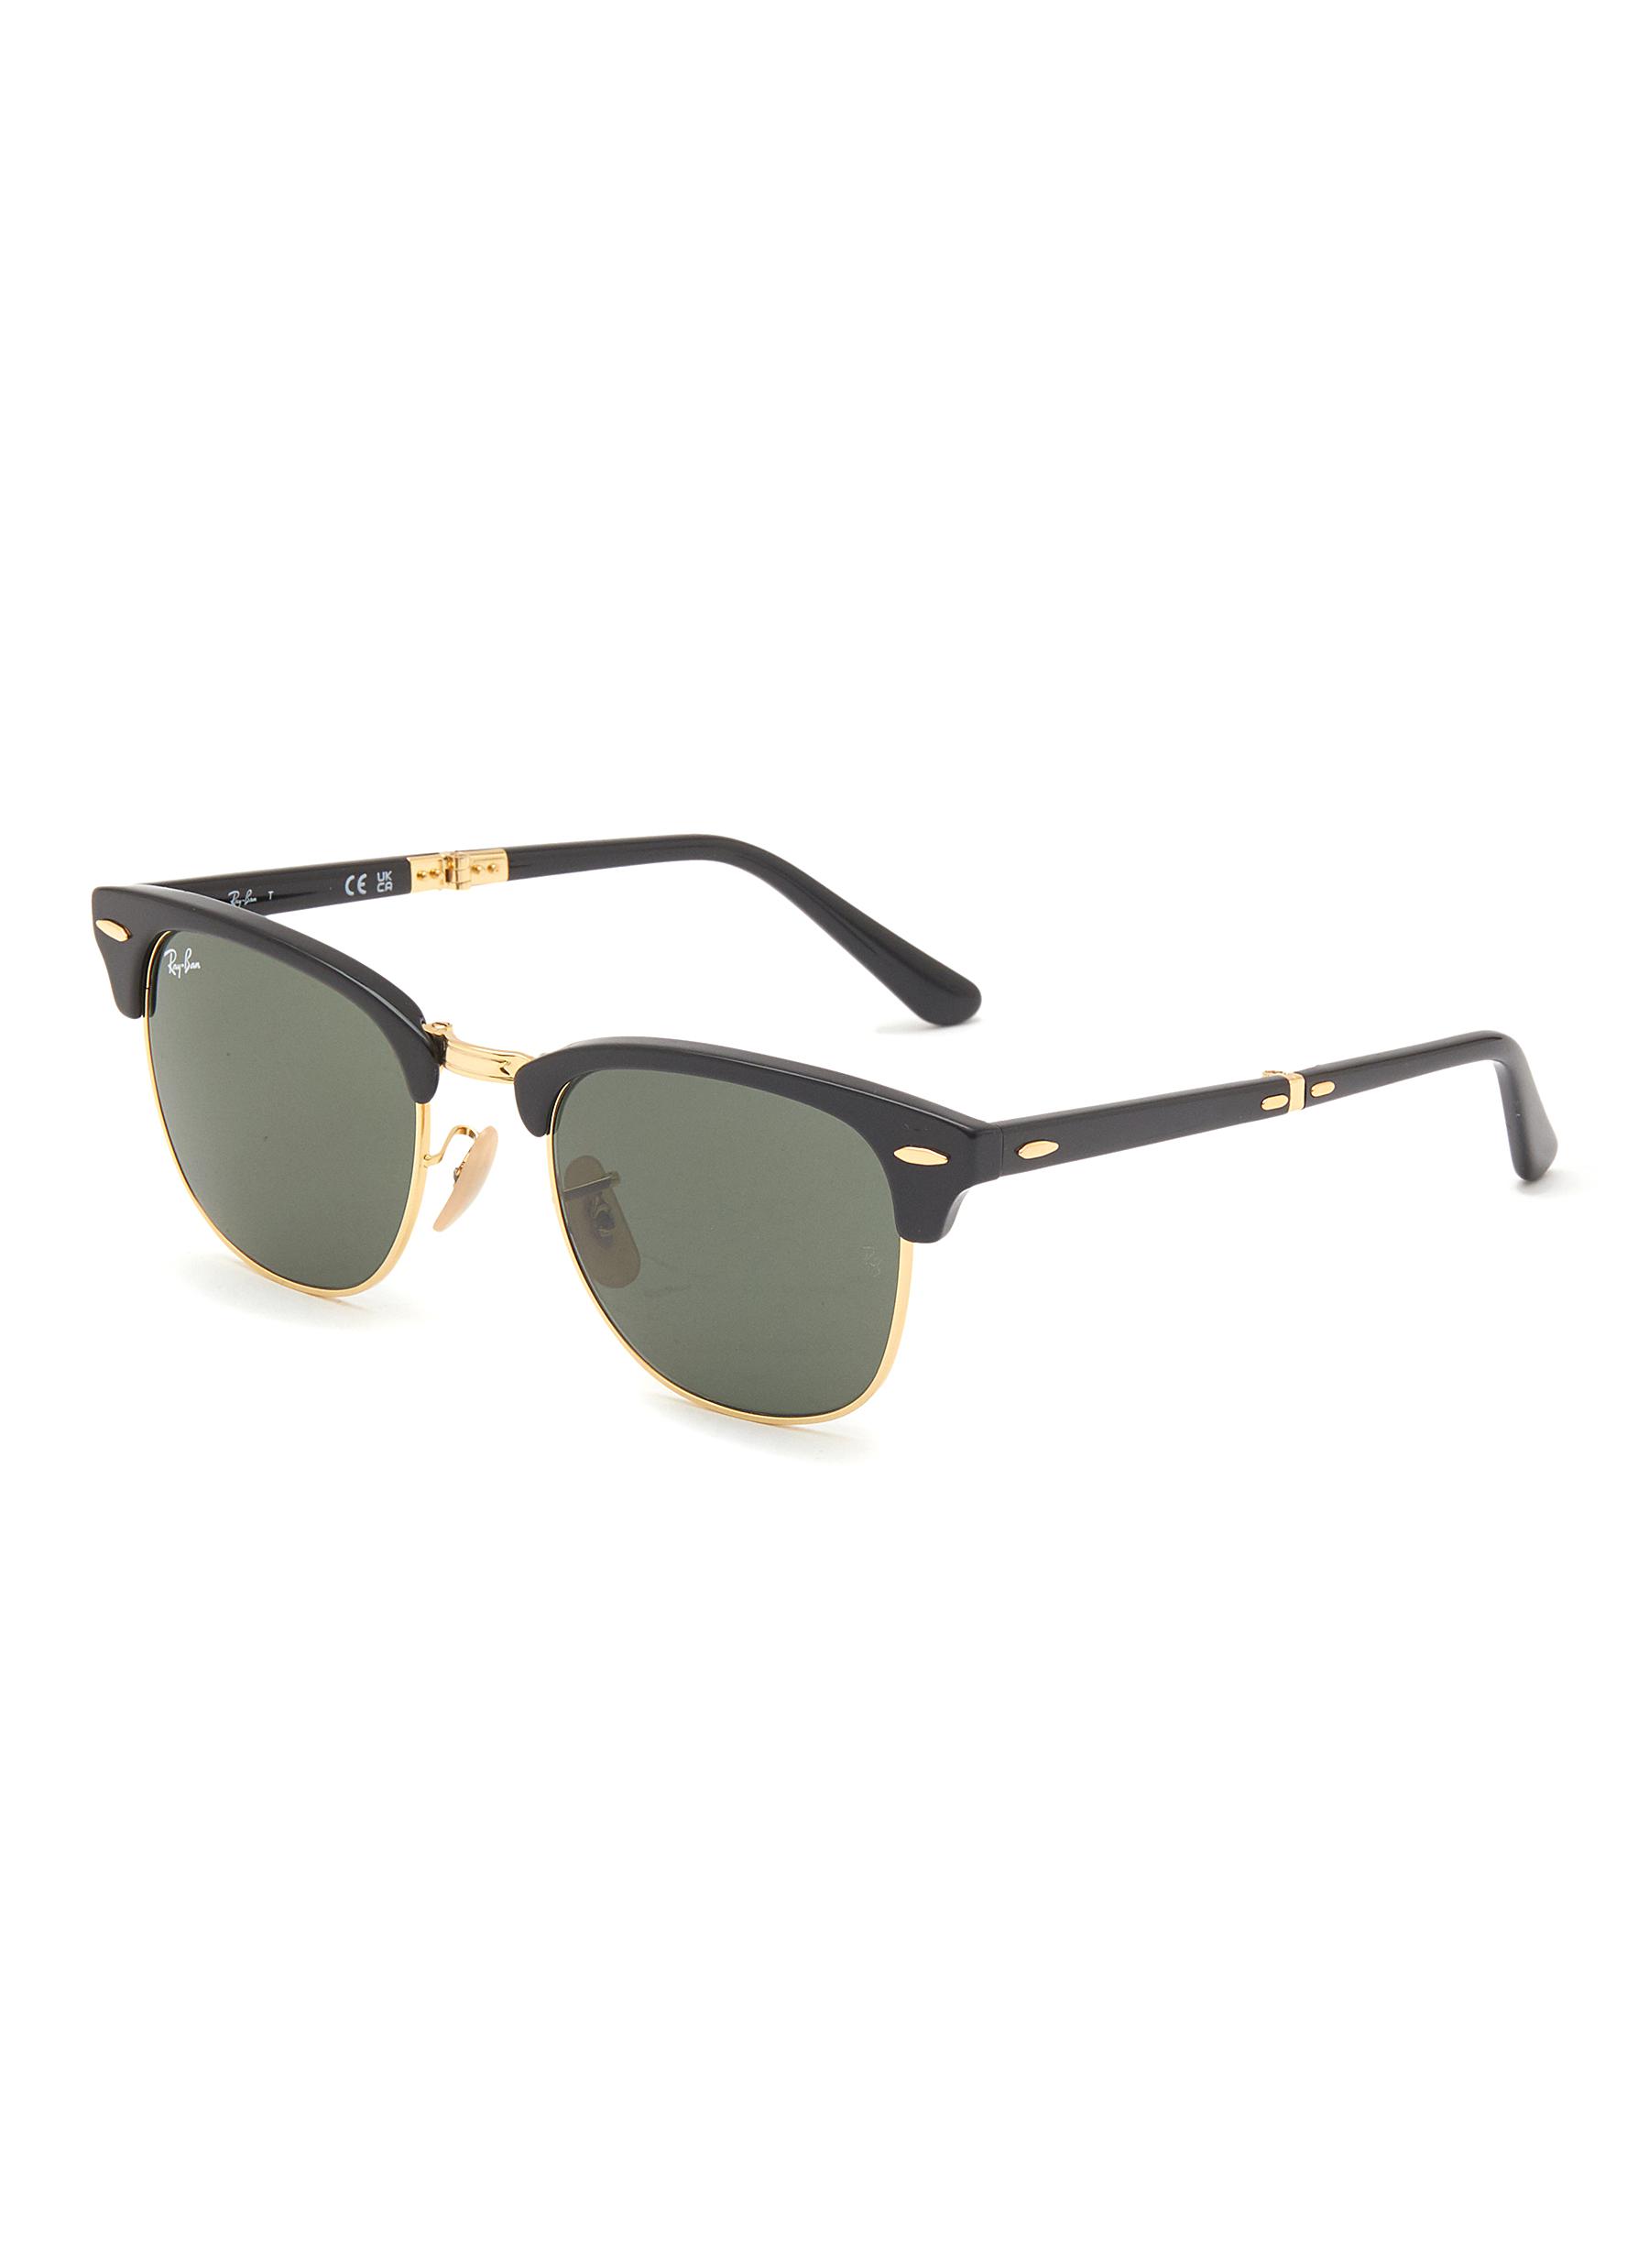 RAY-BAN ‘Clubmaster' Foldable Green Lens Metal Sunglasses